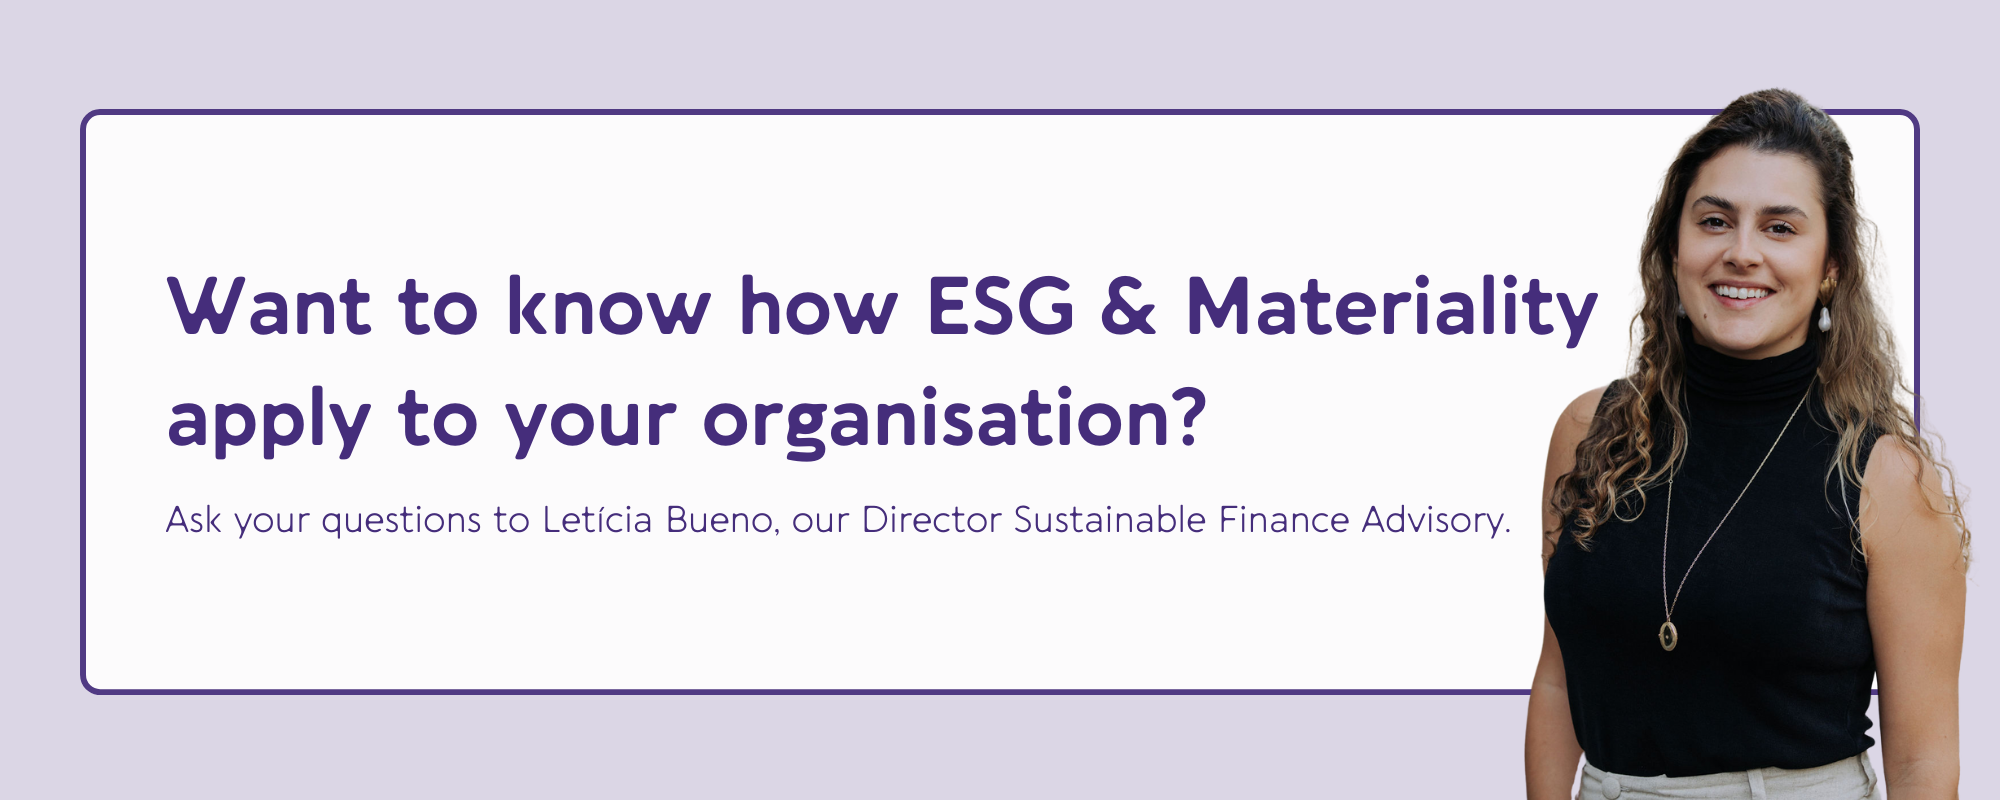 Want to know how ESG & Materiality apply to your organisation?